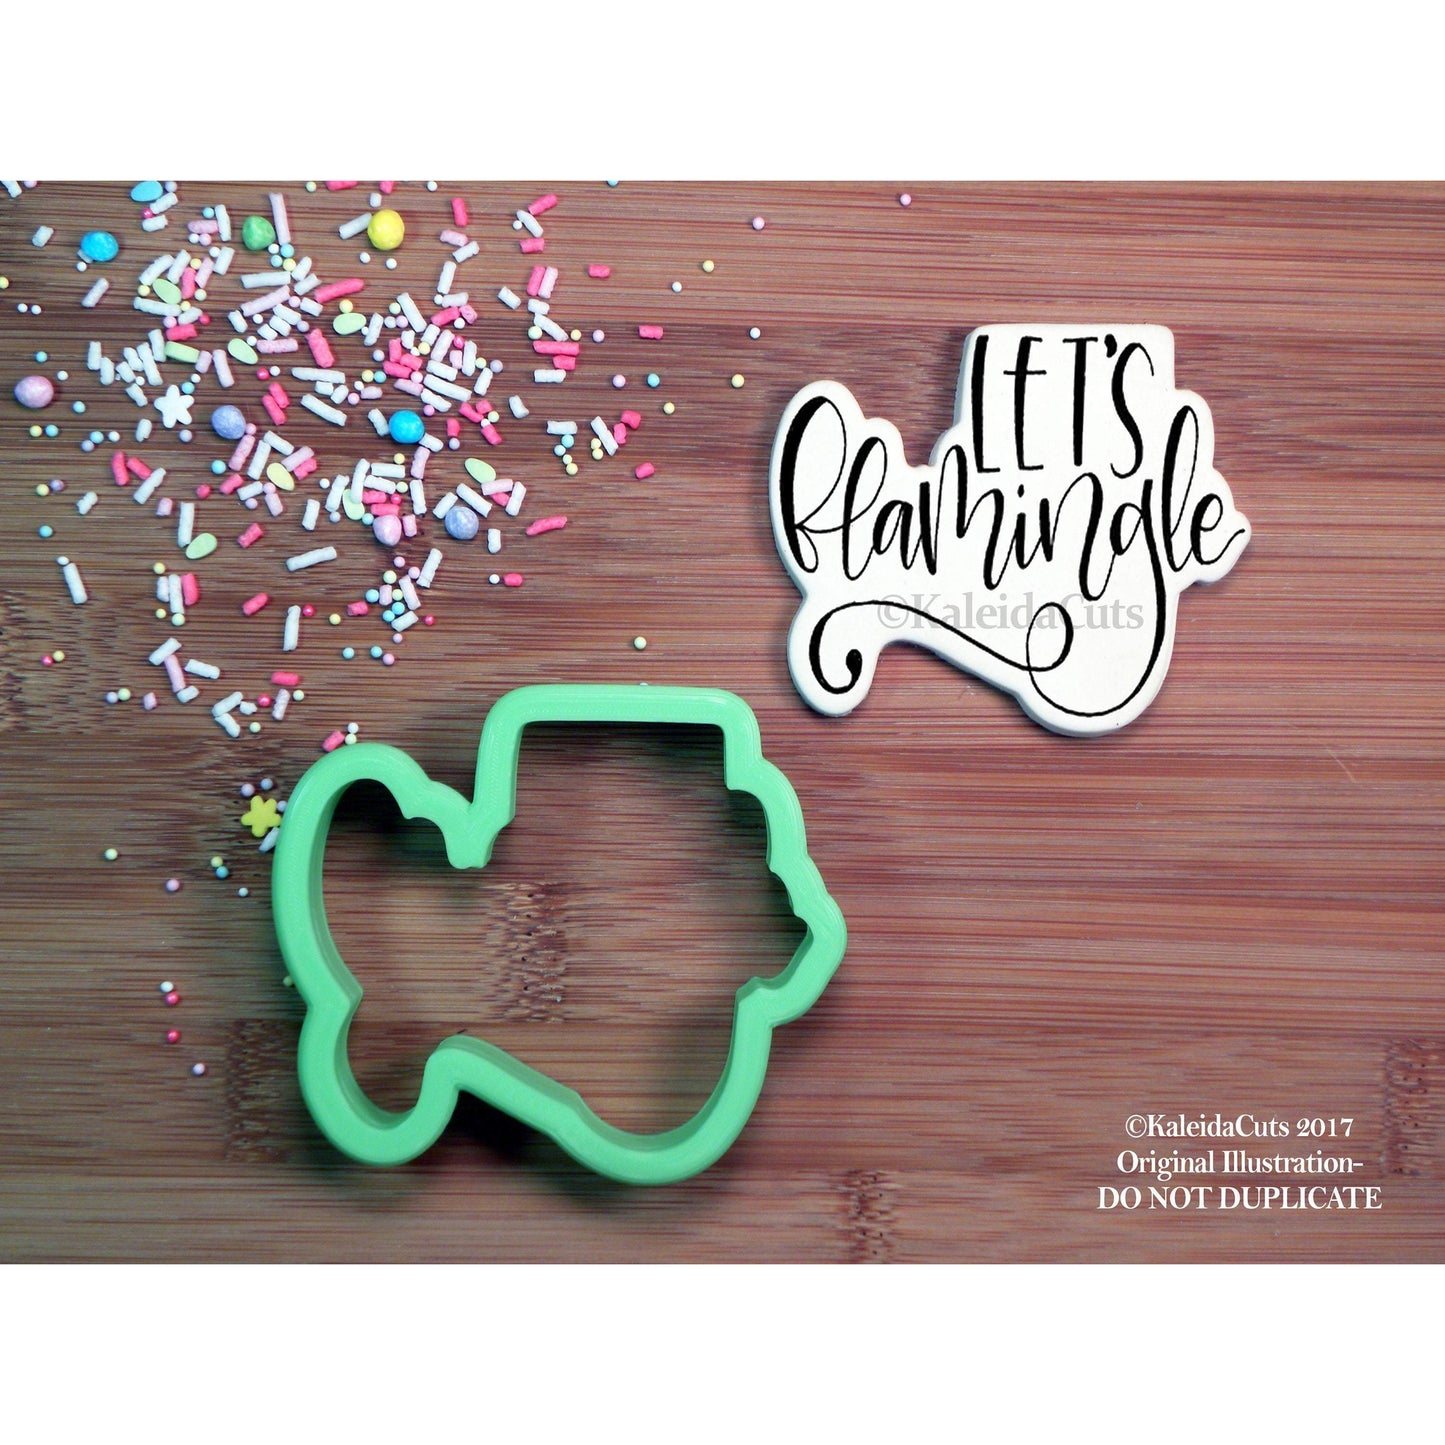 Lets Flamingle Cookie Cutter